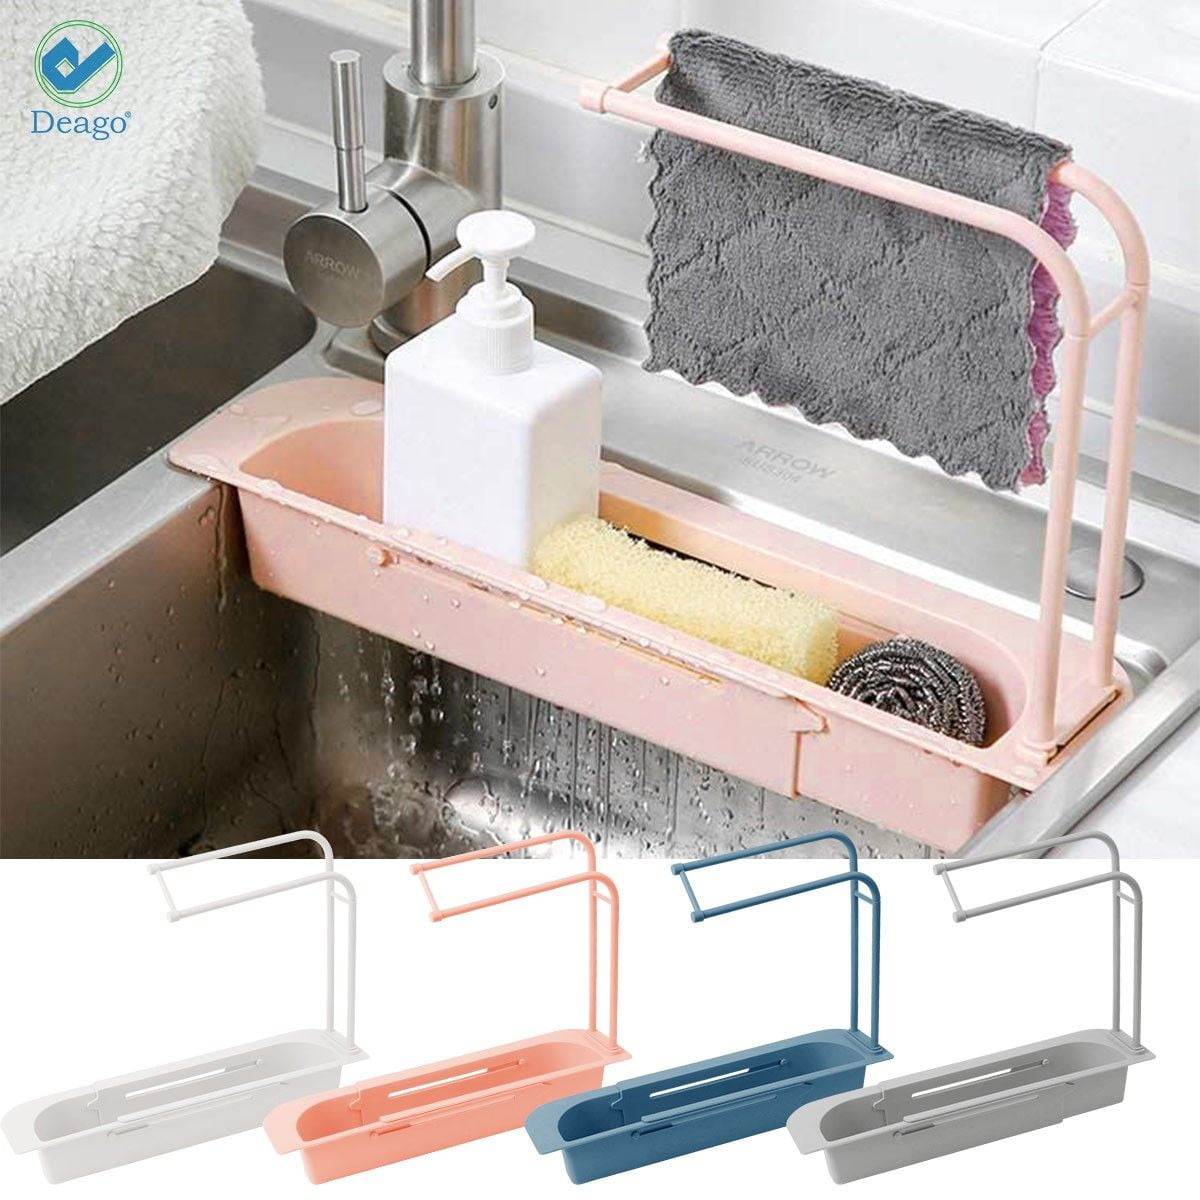 YZCH Dish Drainer,Telescopic Sink Rack Holder Expandable Storage Drain Basket for Home Kitchen 